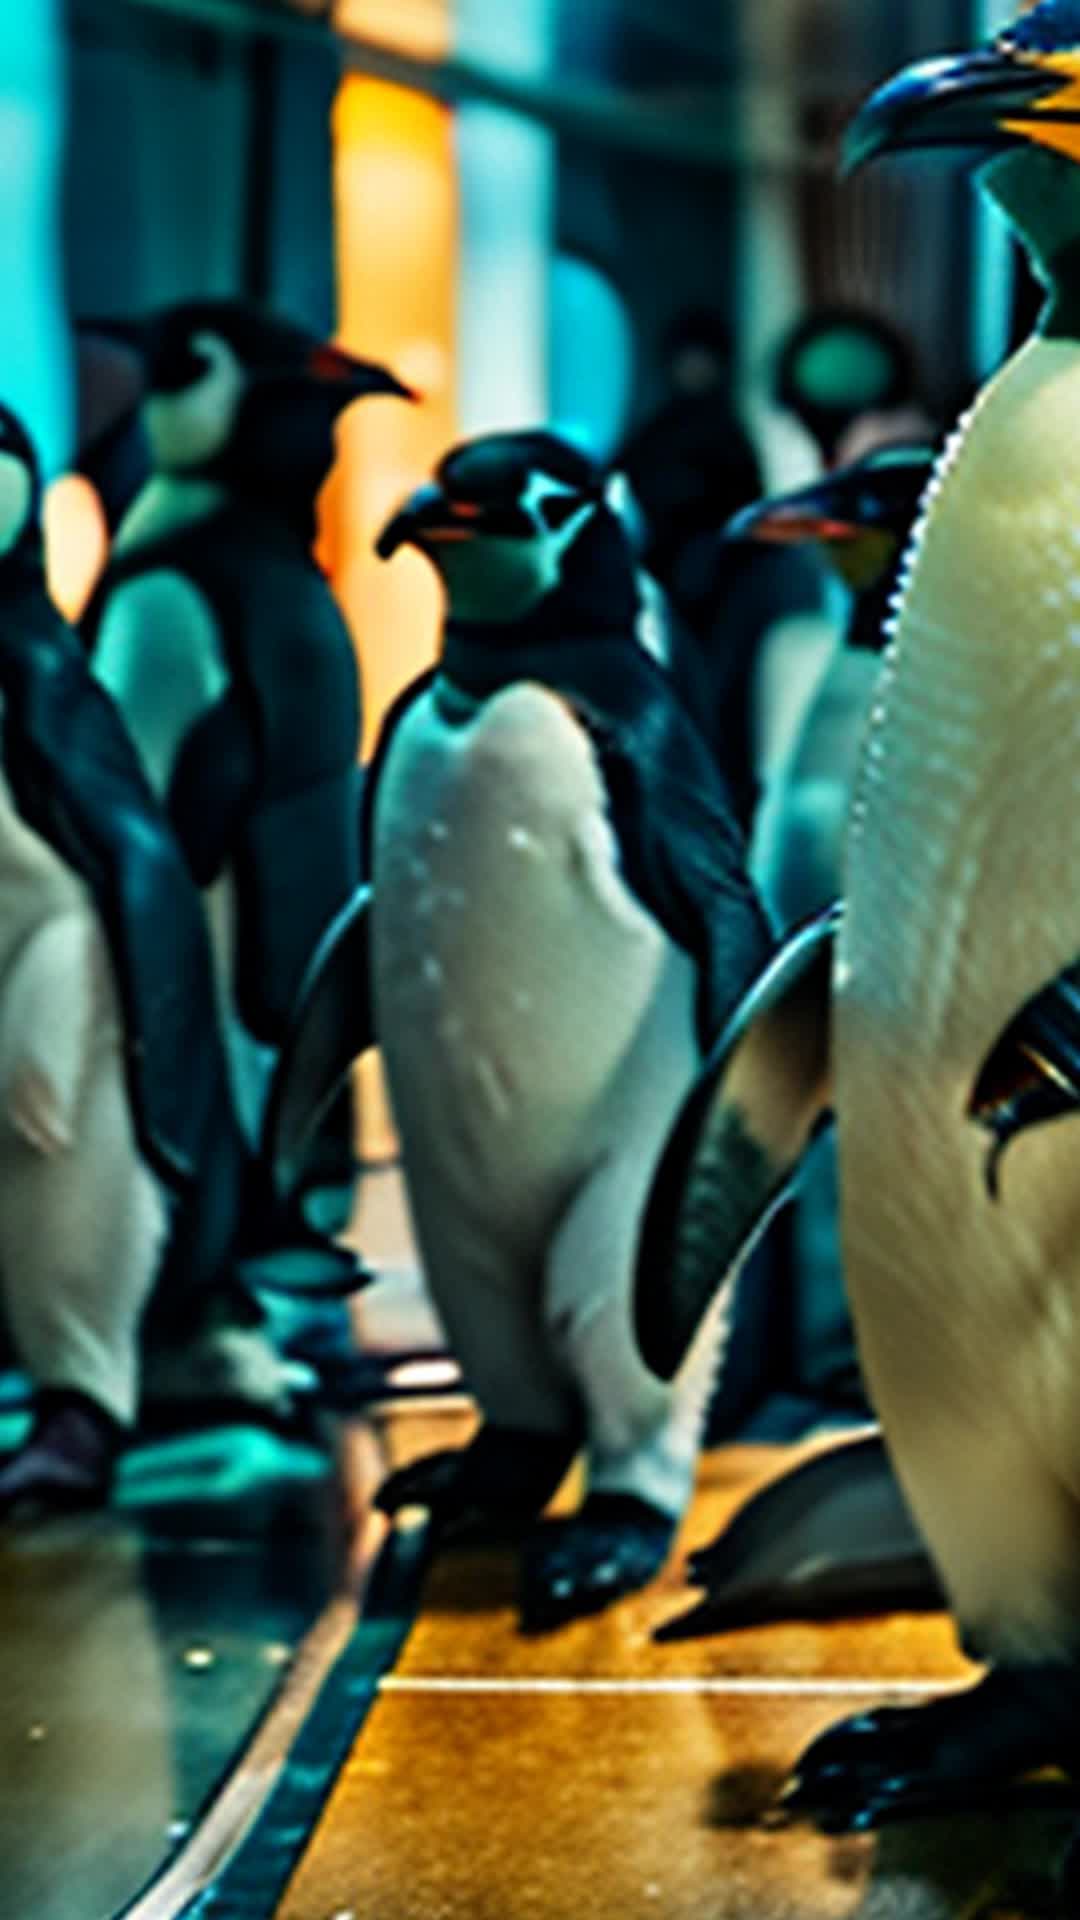 Penguins darting between bewildered tourists on cruise ship, flippers slipping on polished decks, chaotic yet humorous, interior ship details, soft indoor lighting, high resolution